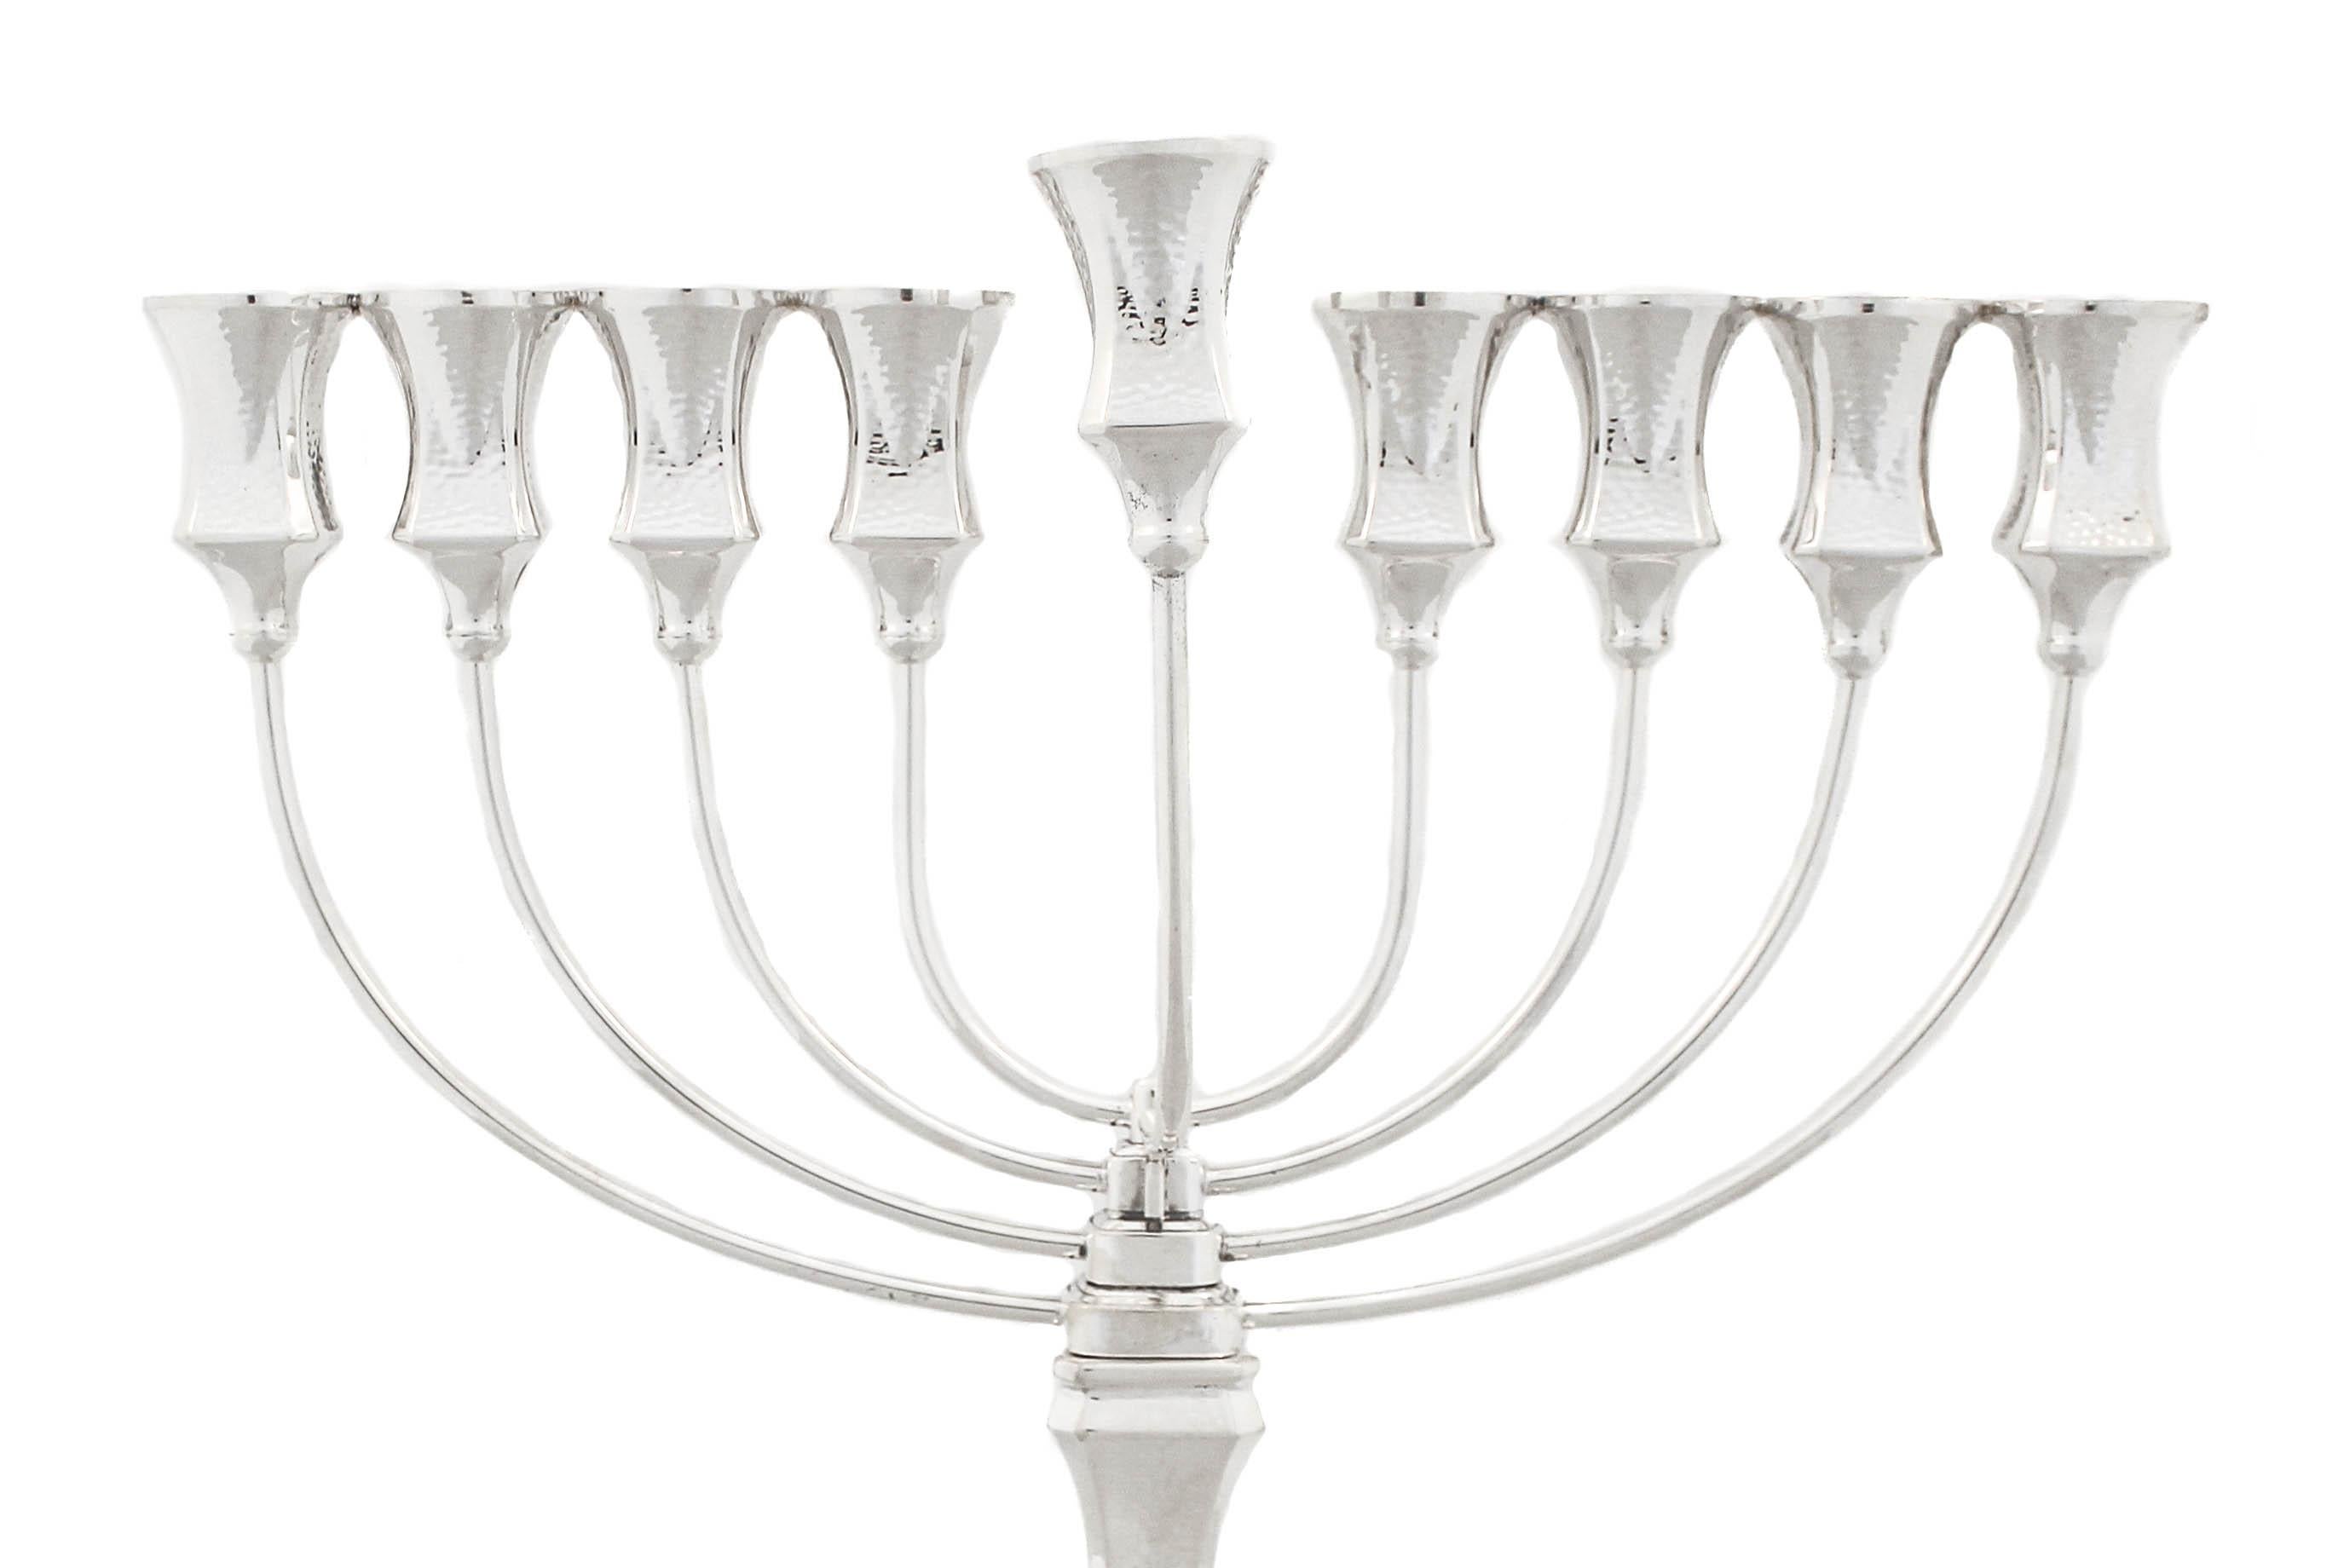 Being offered is a sterling silver hammered menorah.  The base and cups have a hammered finish giving it a more modern design.  Both the base and cups have a square shape unlike the conventional round shape.  The menorah unscrews in the center